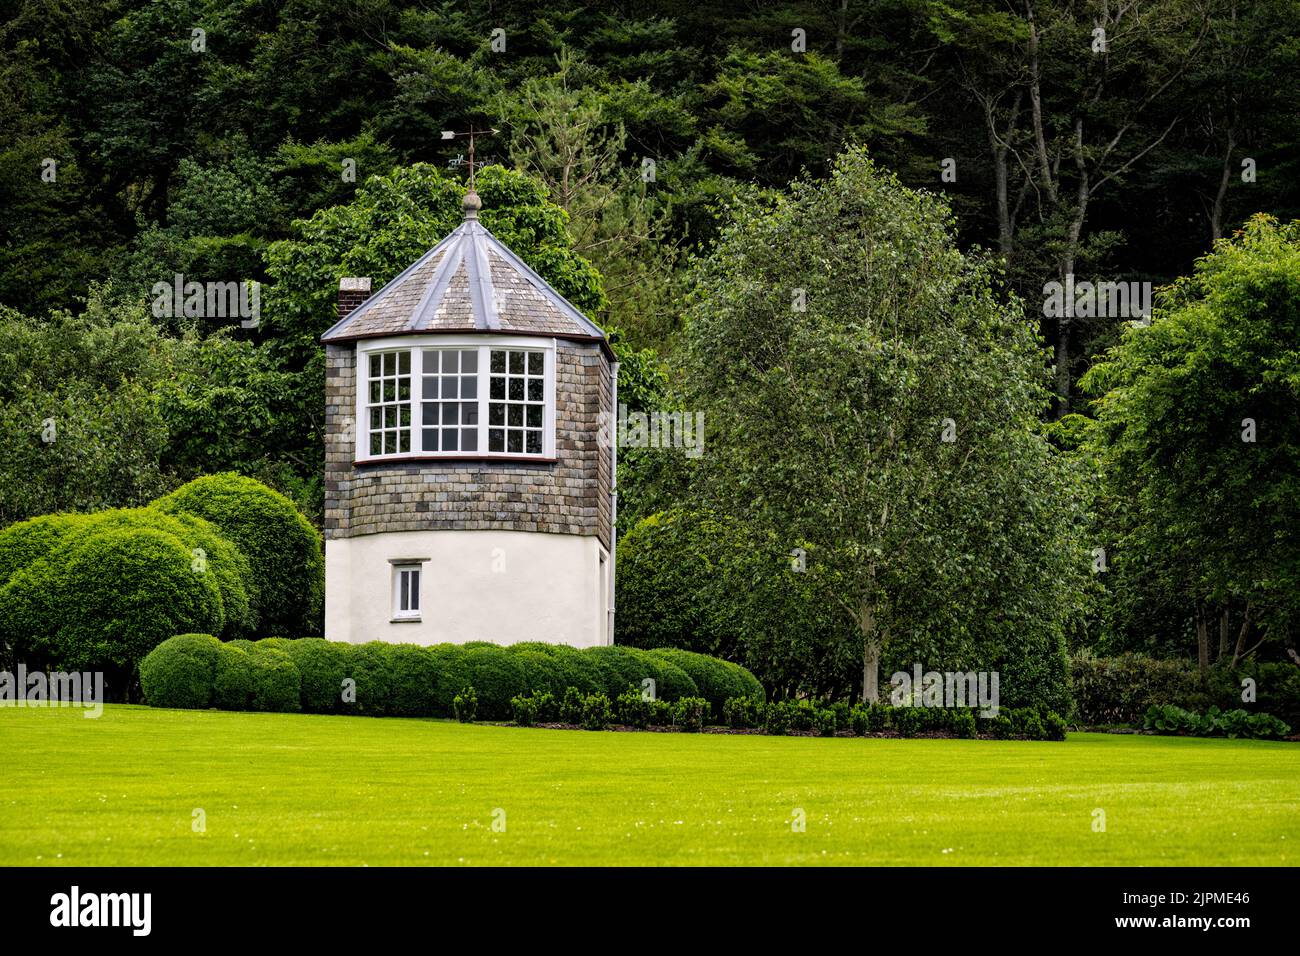 The Gazebo, dating from approx. 1752 was formerly located at Palmer House.  RHS Rosemoor Garden, Great Torrington, Devon, UK Stock Photo